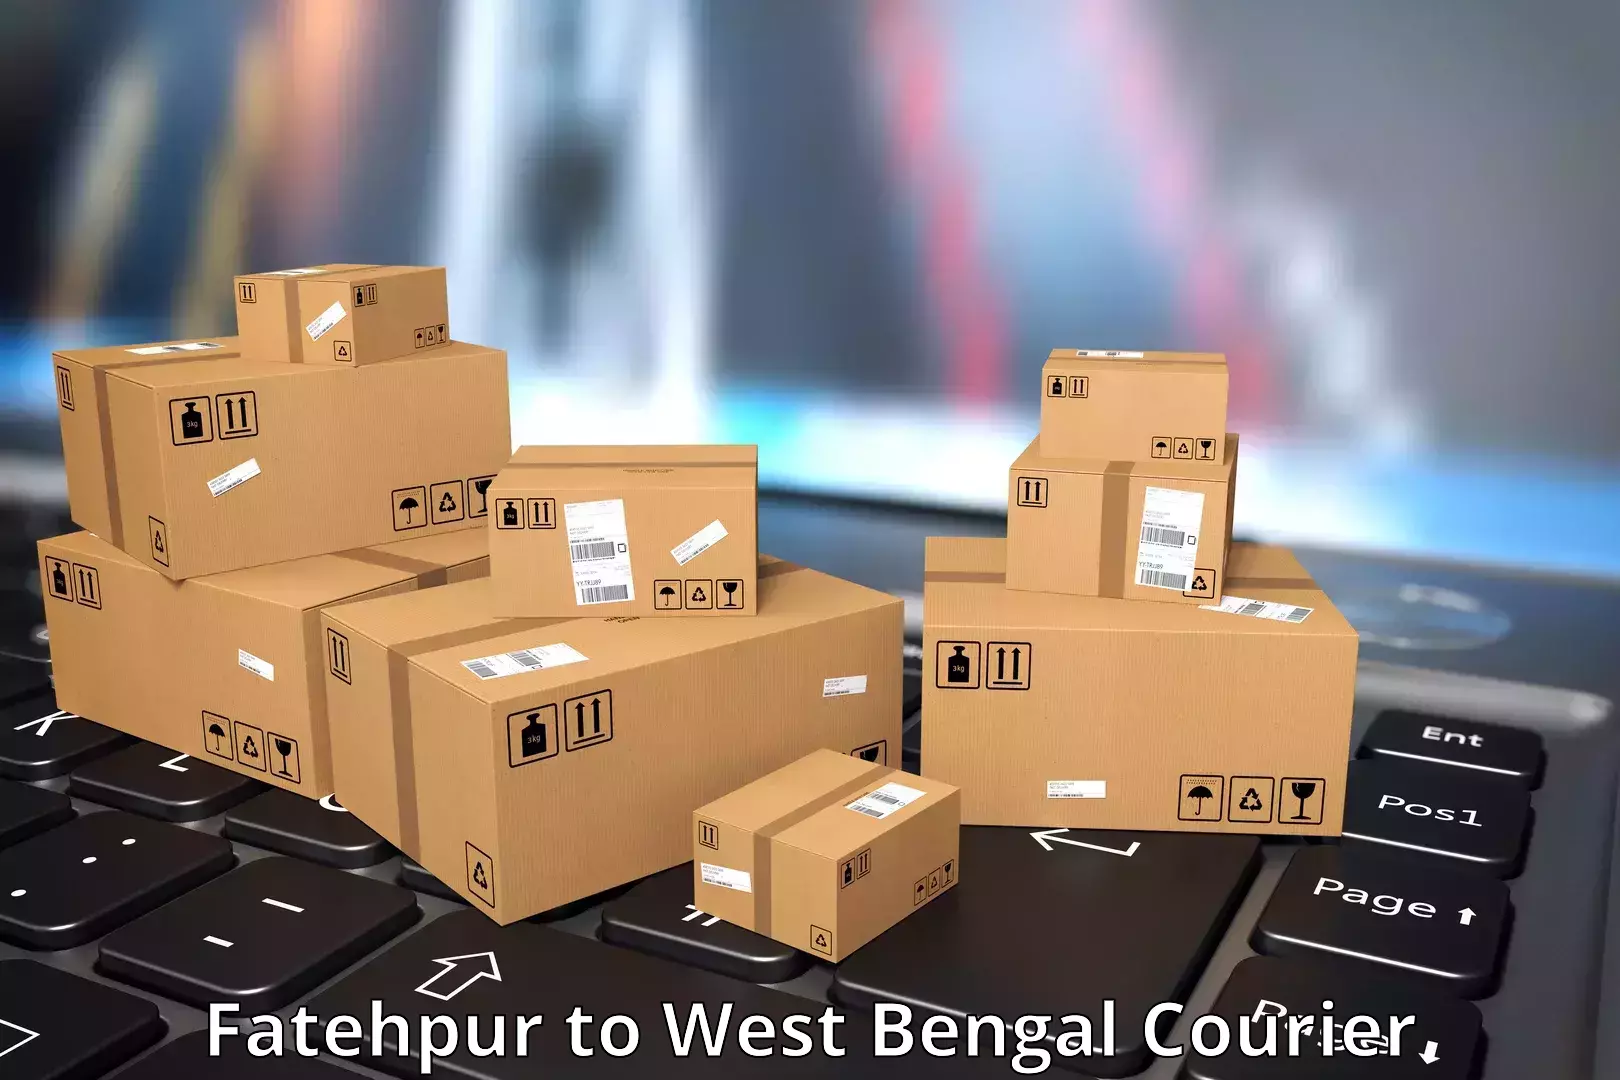 High-priority parcel service Fatehpur to West Bengal